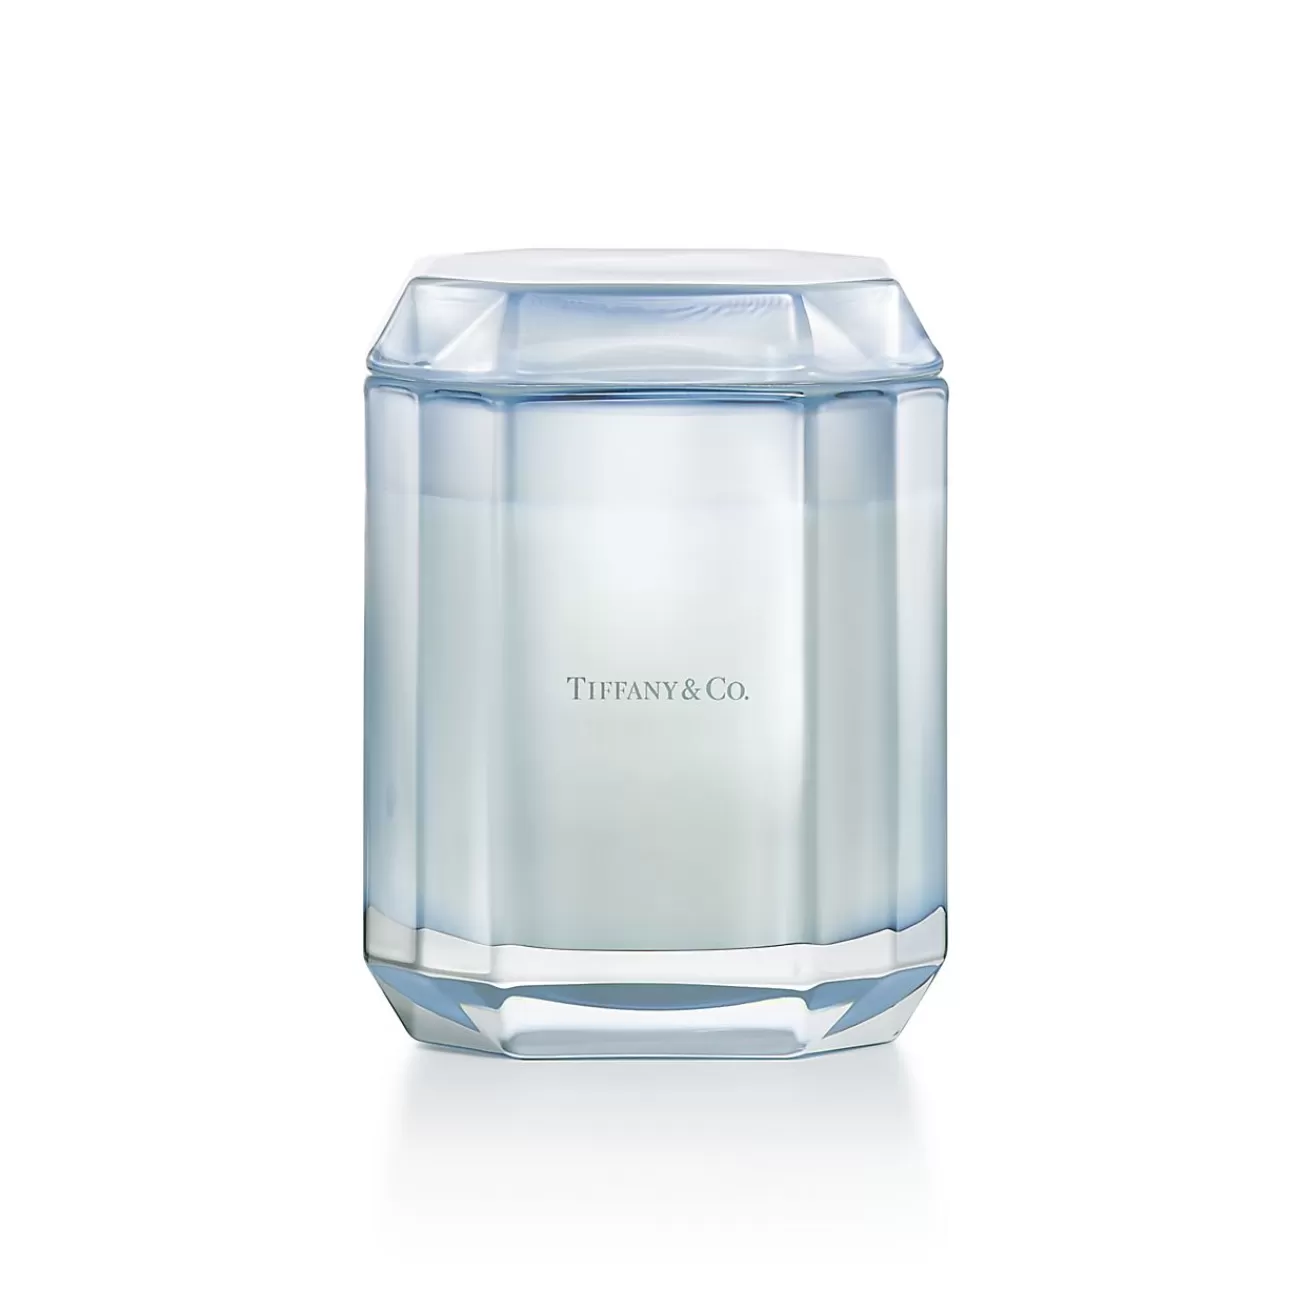 Tiffany & Co. Tiffany Facets Blue is the Color of Love Candle in Tanzanite-colored Glass | ^ The Home | Housewarming Gifts